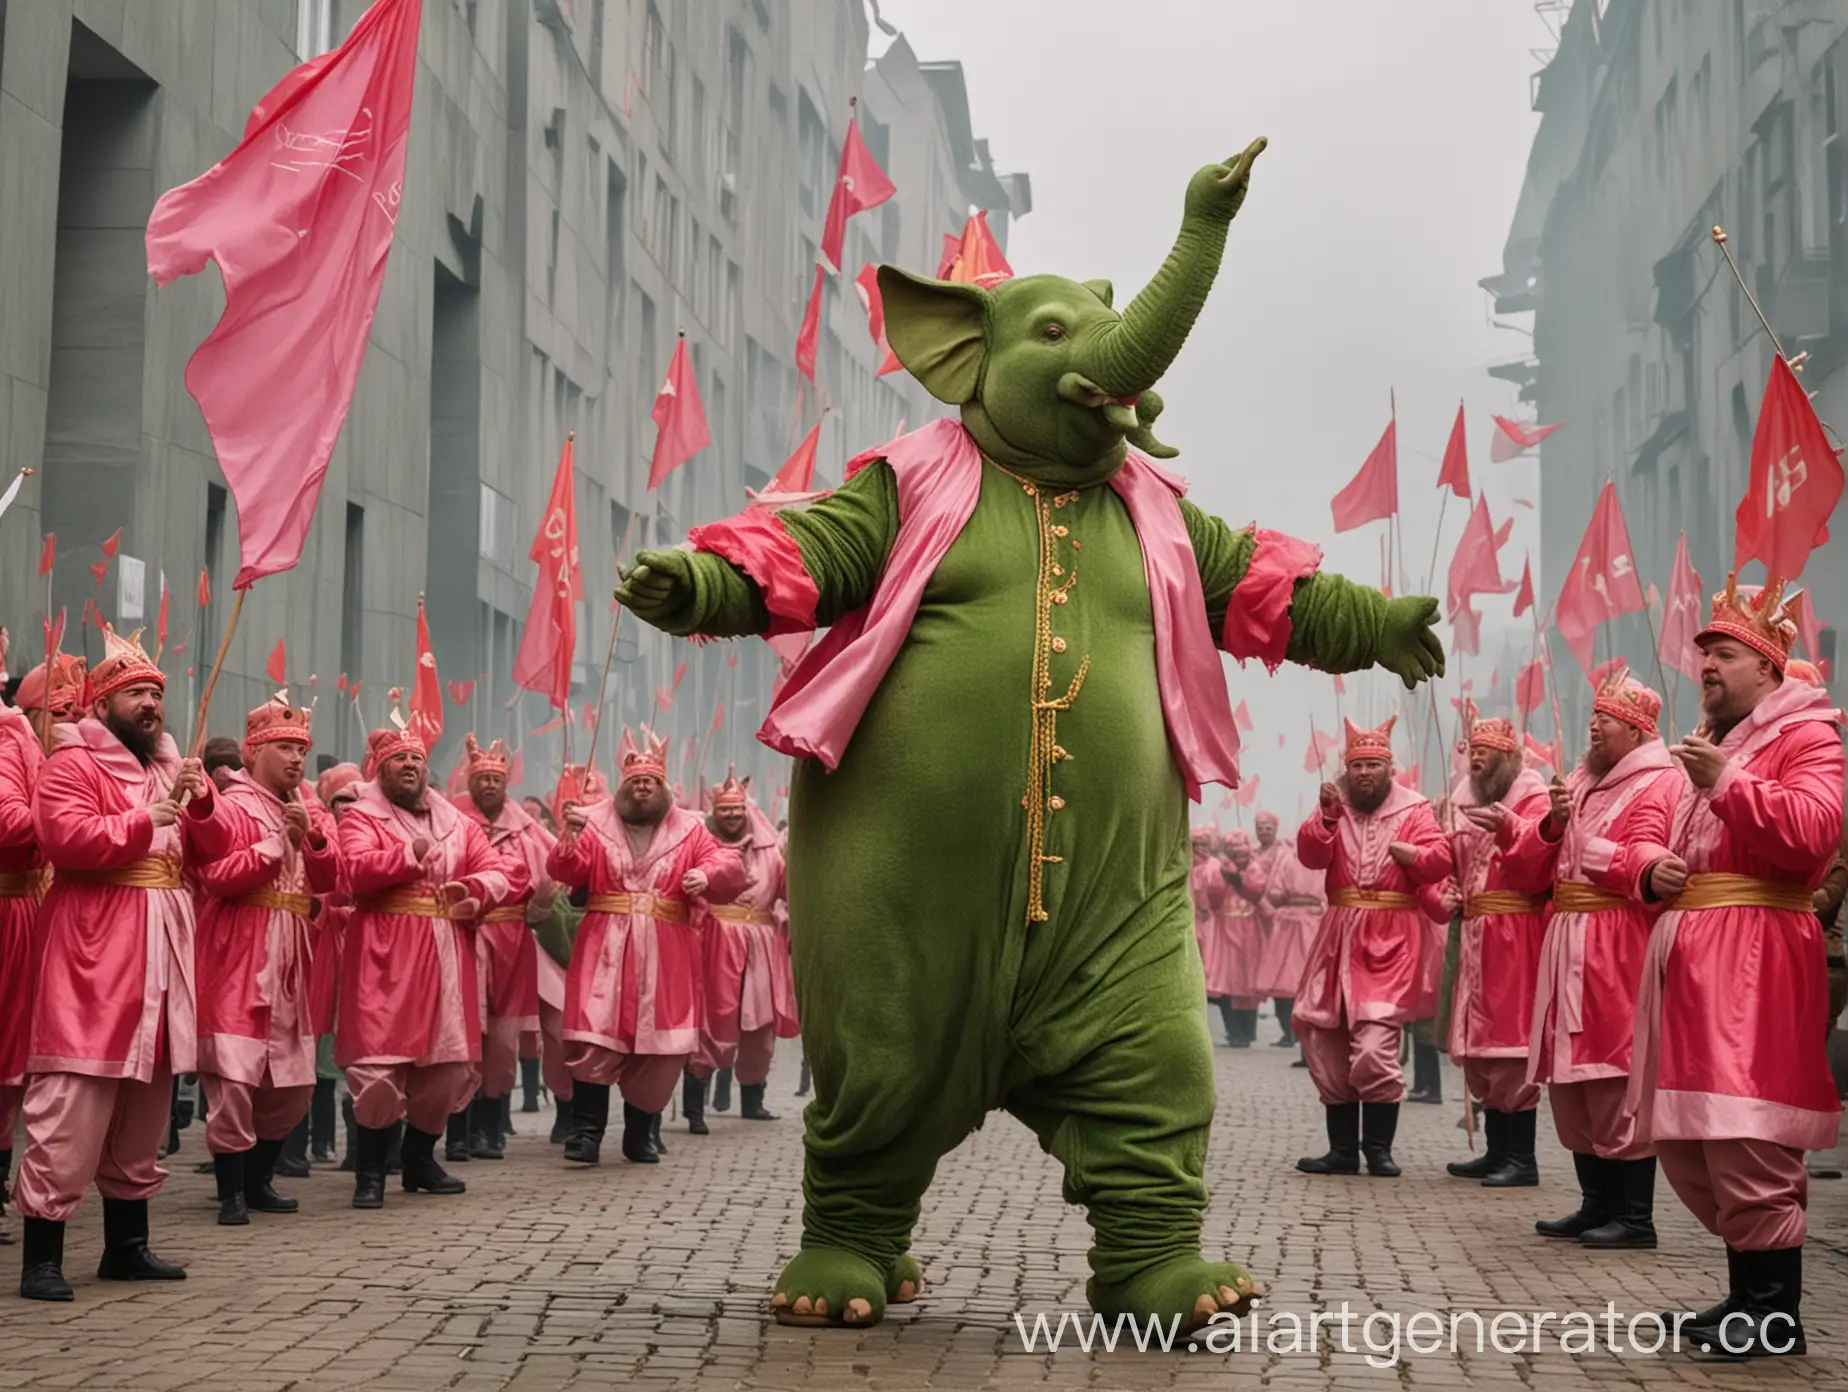 A bald, fat, shaggy man dressed in a green elephant costume, dancing with friends in pink deer costumes, red flags flying on ropes, a large statue of Lenin